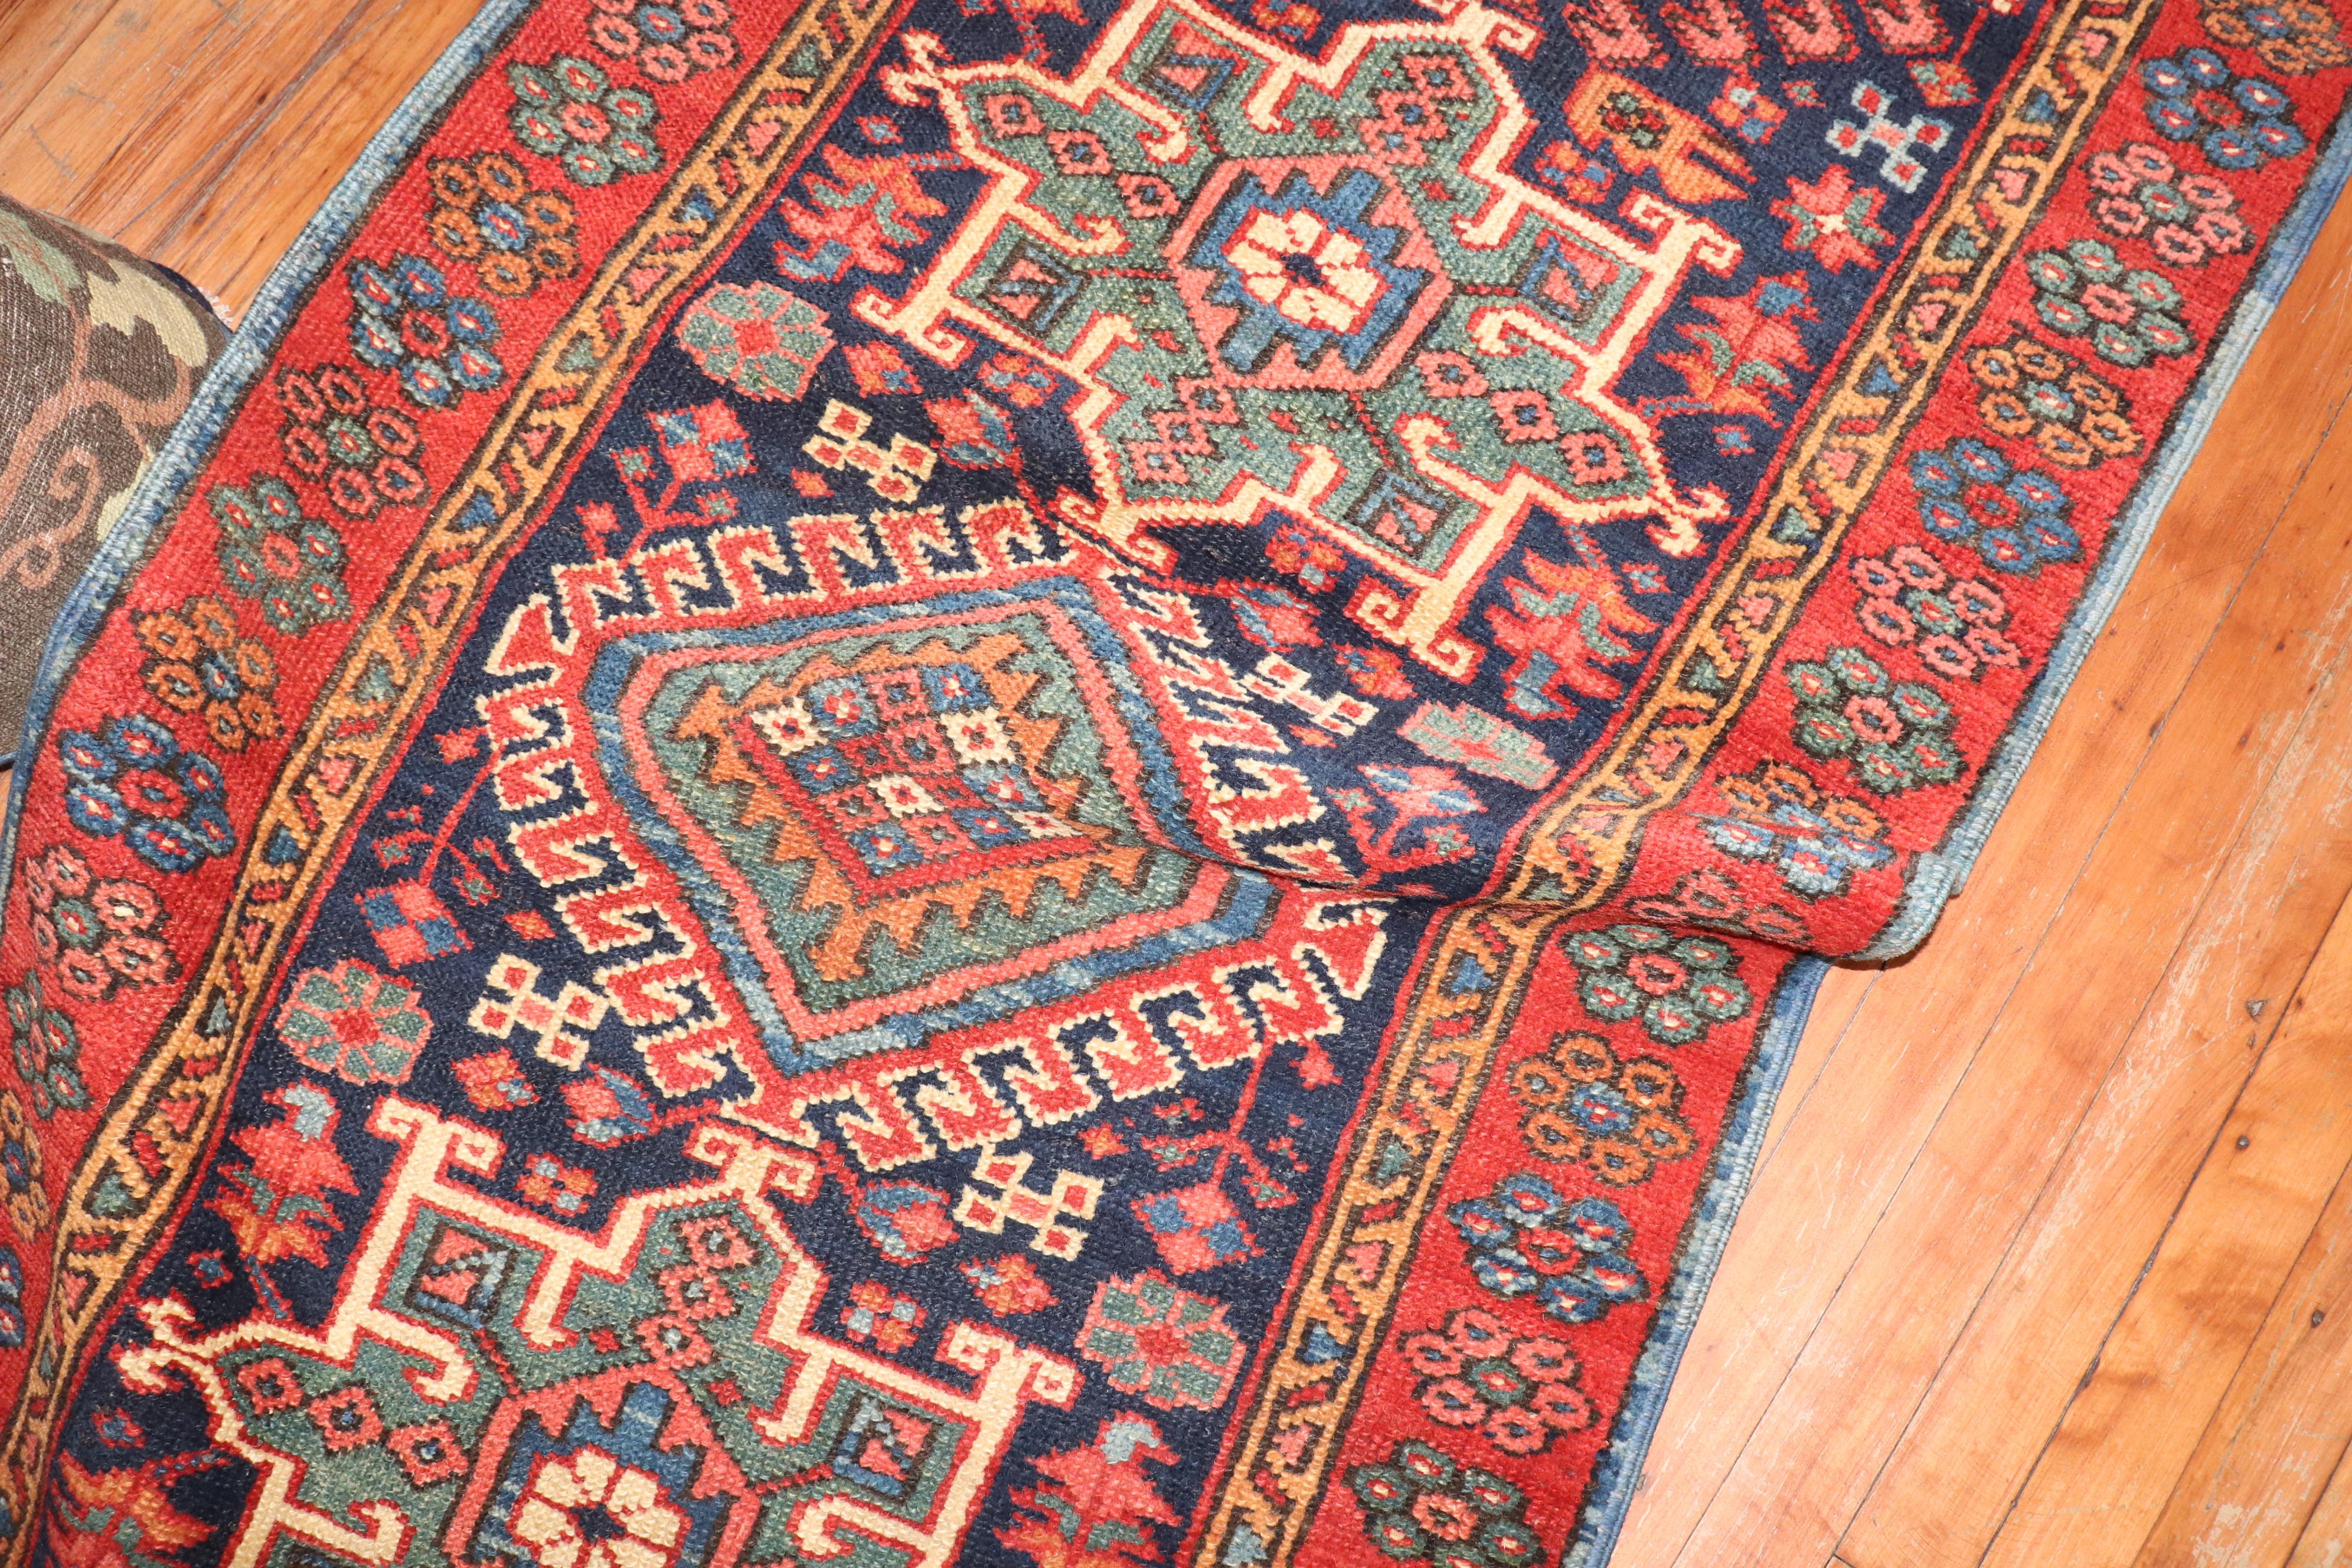 Colorful antique Persian Heriz runner from the 2nd quarter of the 20th century with an all-over geometric motif on a navy blue ground.

2'10'' x 9'